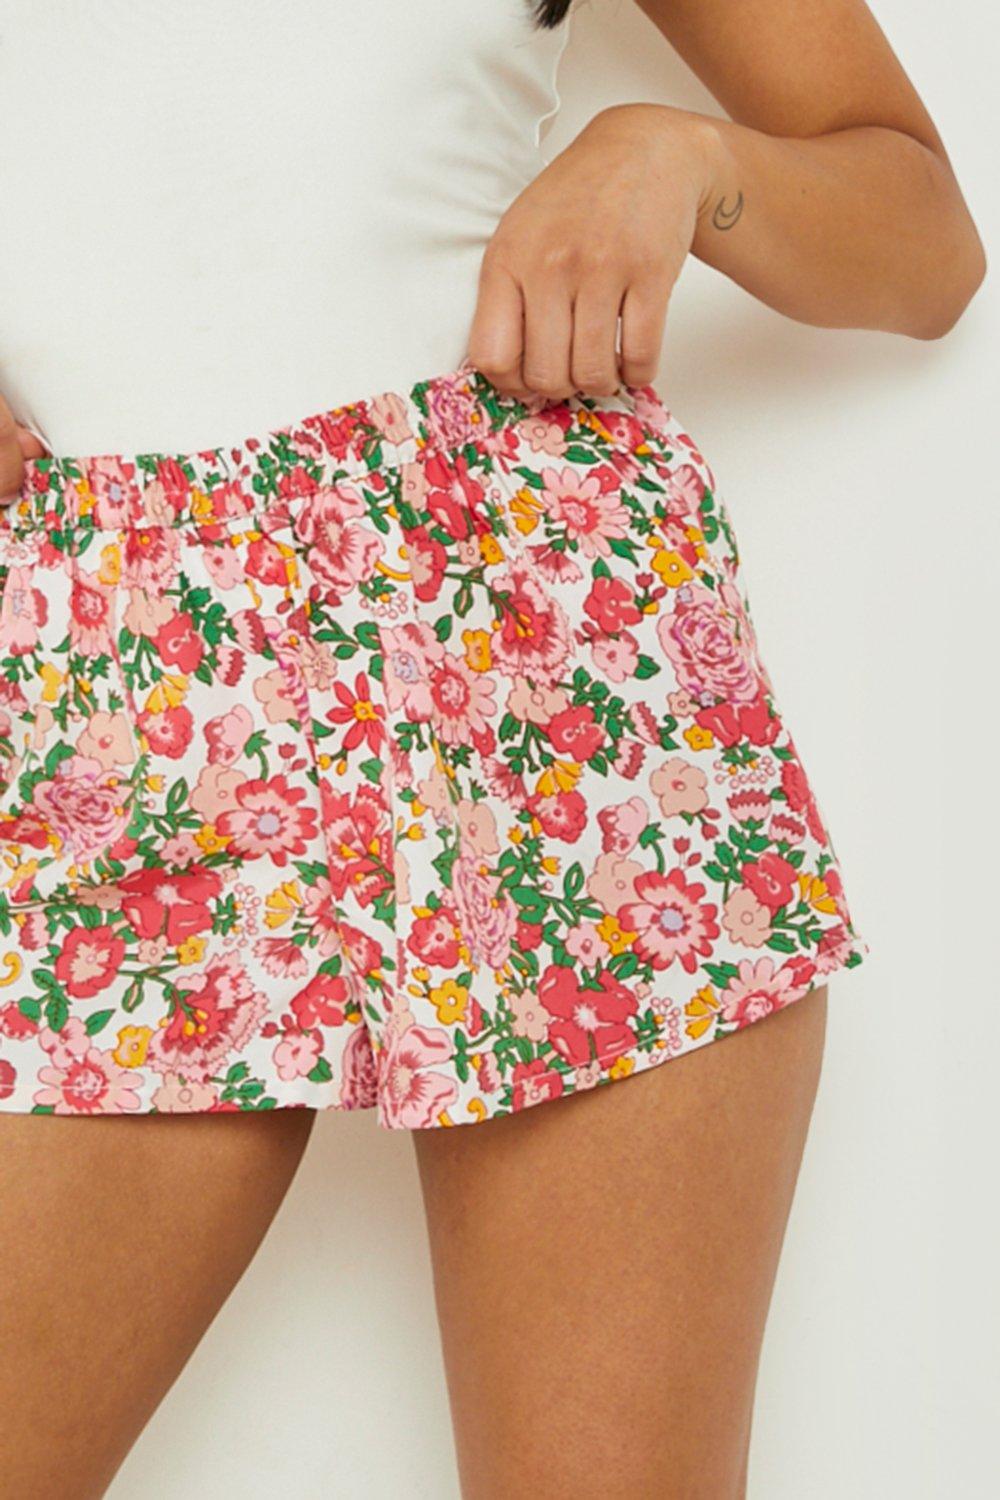 Petite Floral Printed Woven Shorts